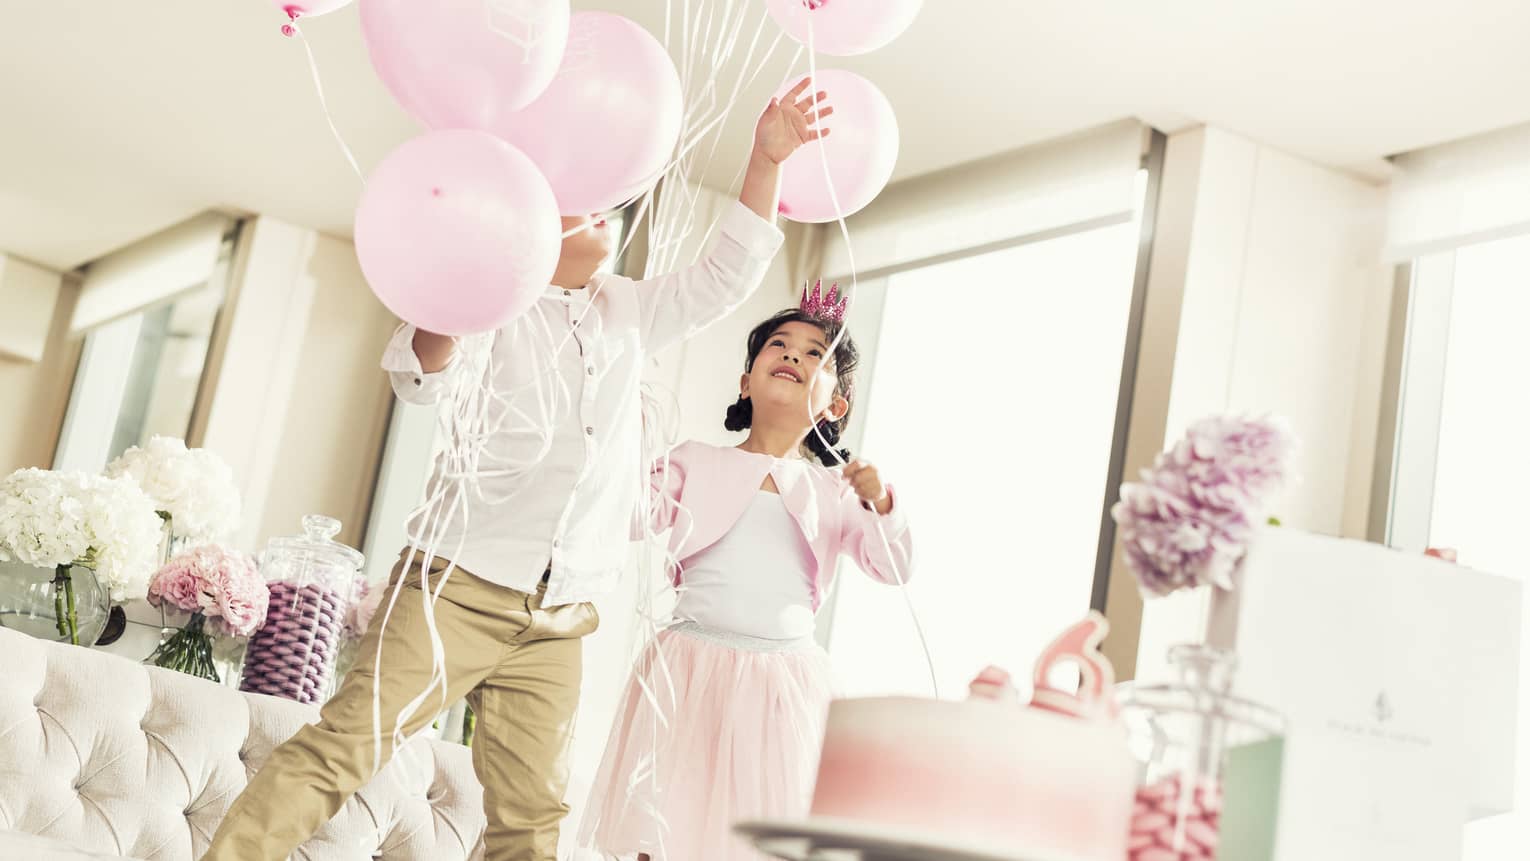 Two kids playing with pink balloons near a pink cake.